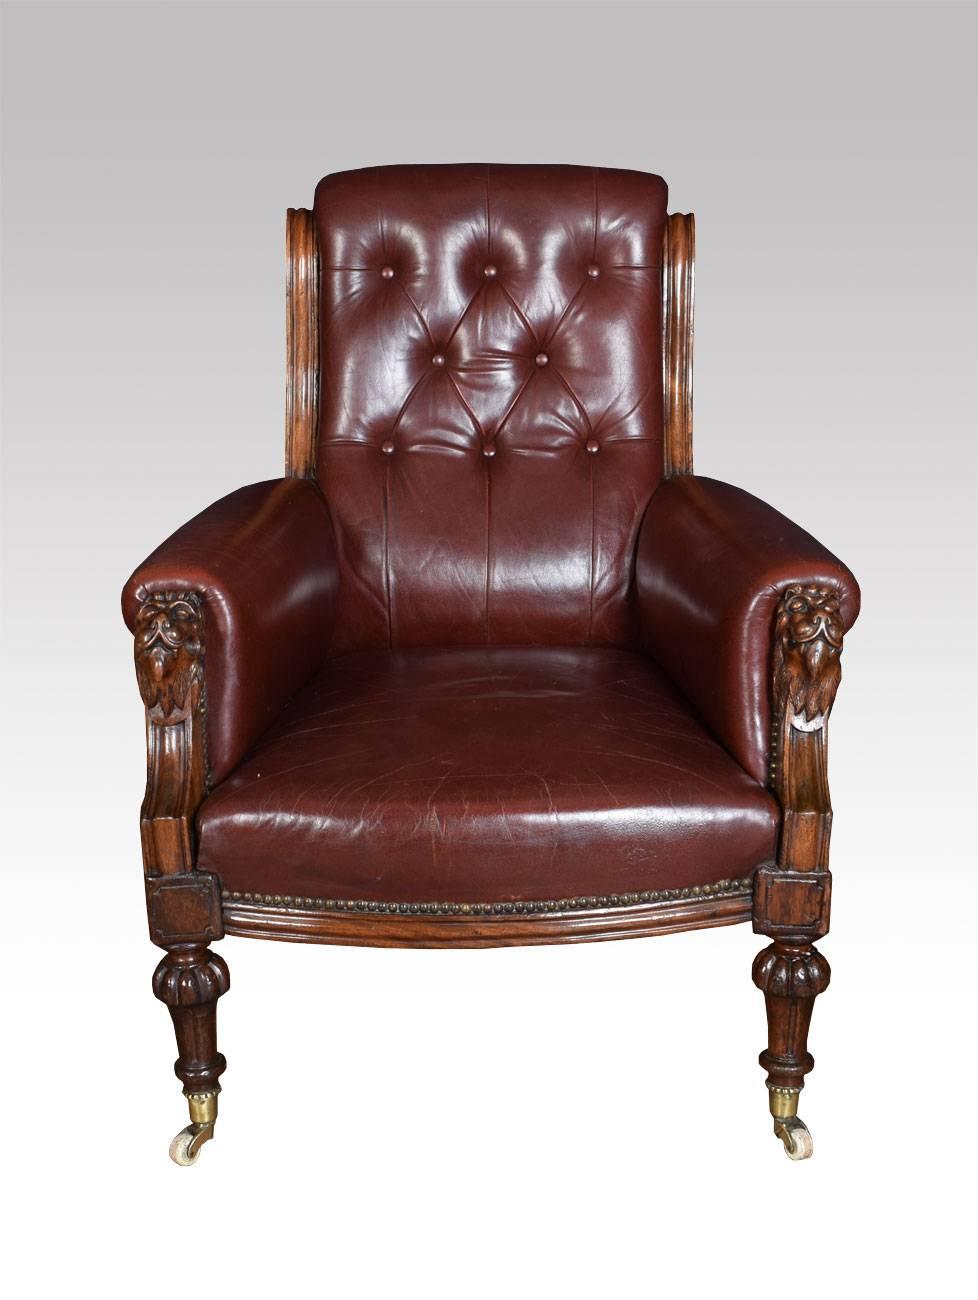 Victorian burgundy leather upholstered mahogany framed armchair the deep buttoned back above upholstered arms and seat with lions head finials all raised up on turned tapering legs terminating in brass caps and ceramic